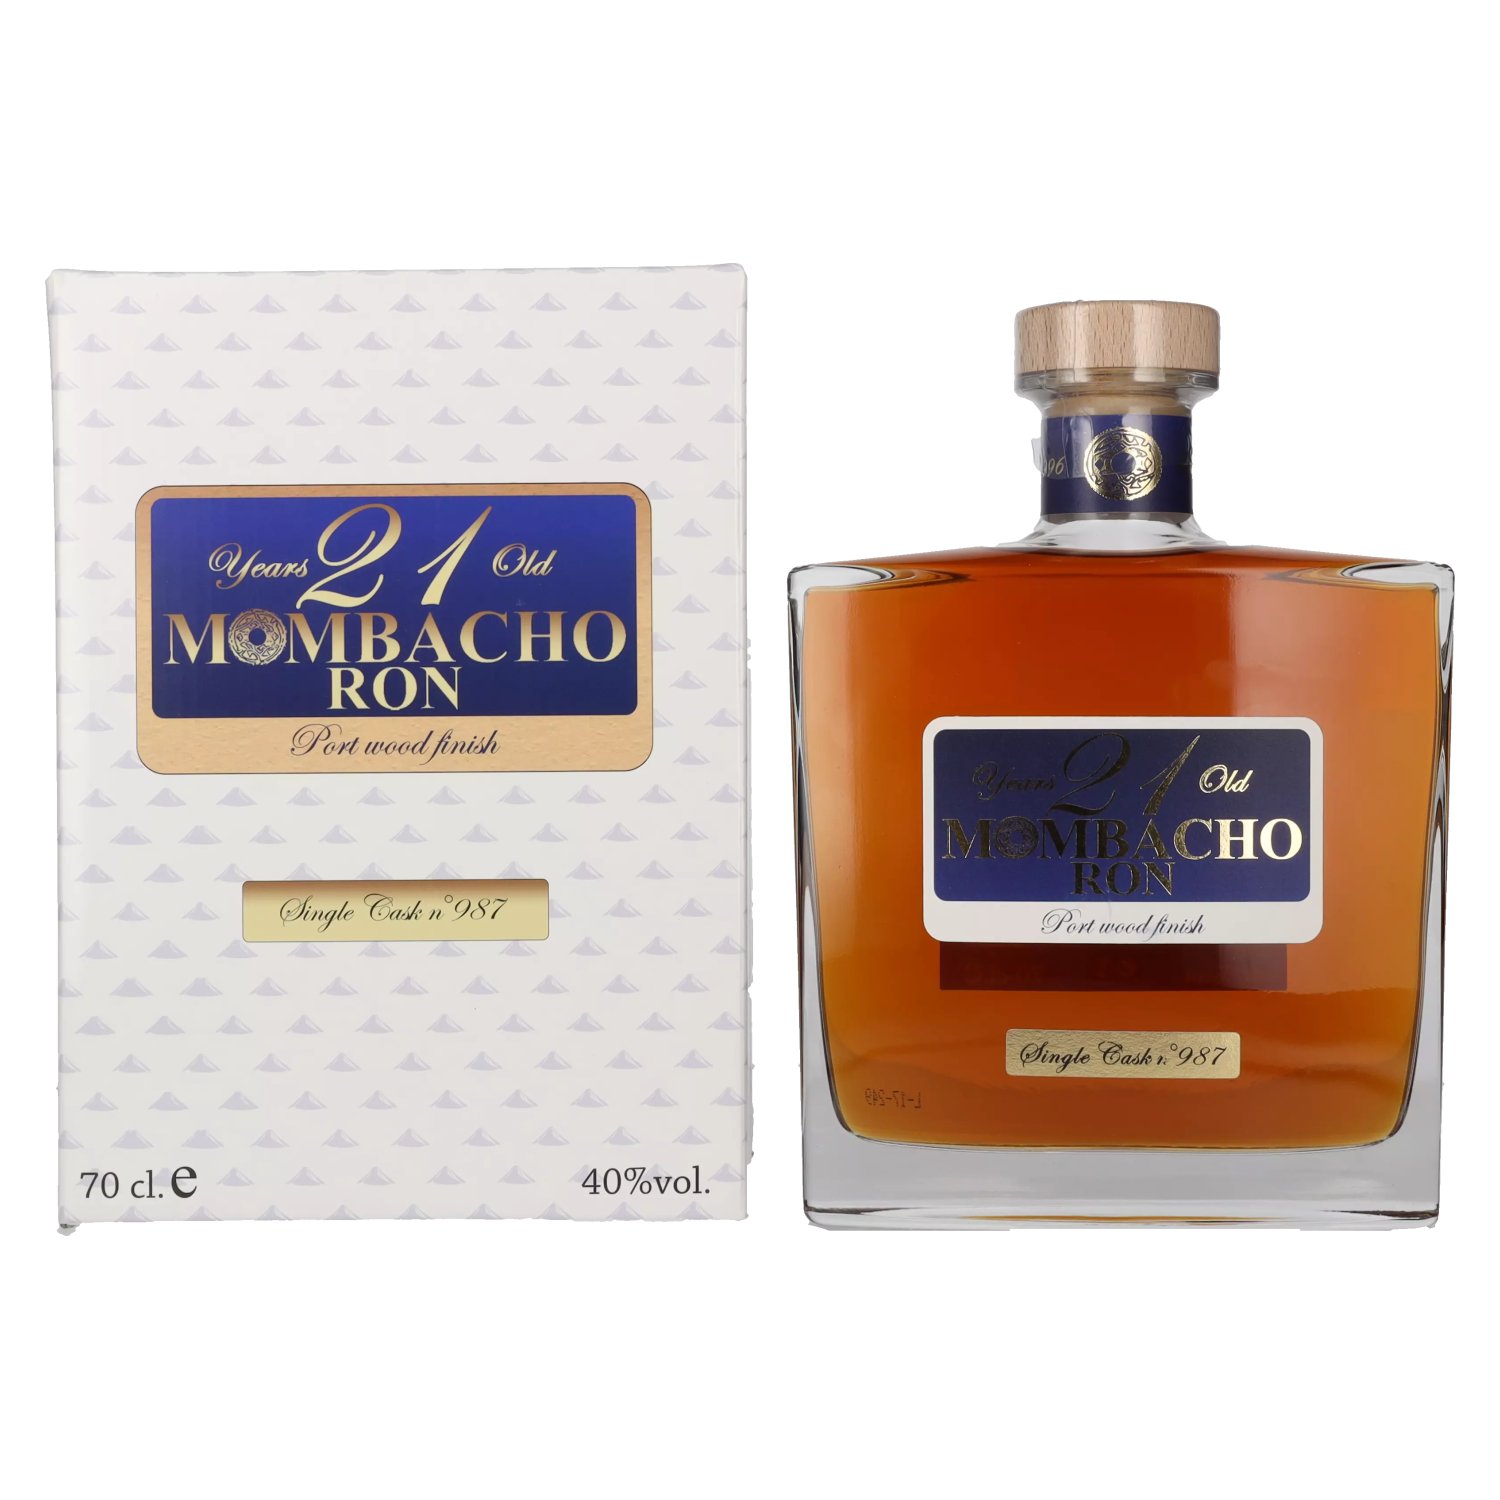 Ron Port in 21 40% Giftbox Years 0,7l Old Finish Mombacho Wood Vol.